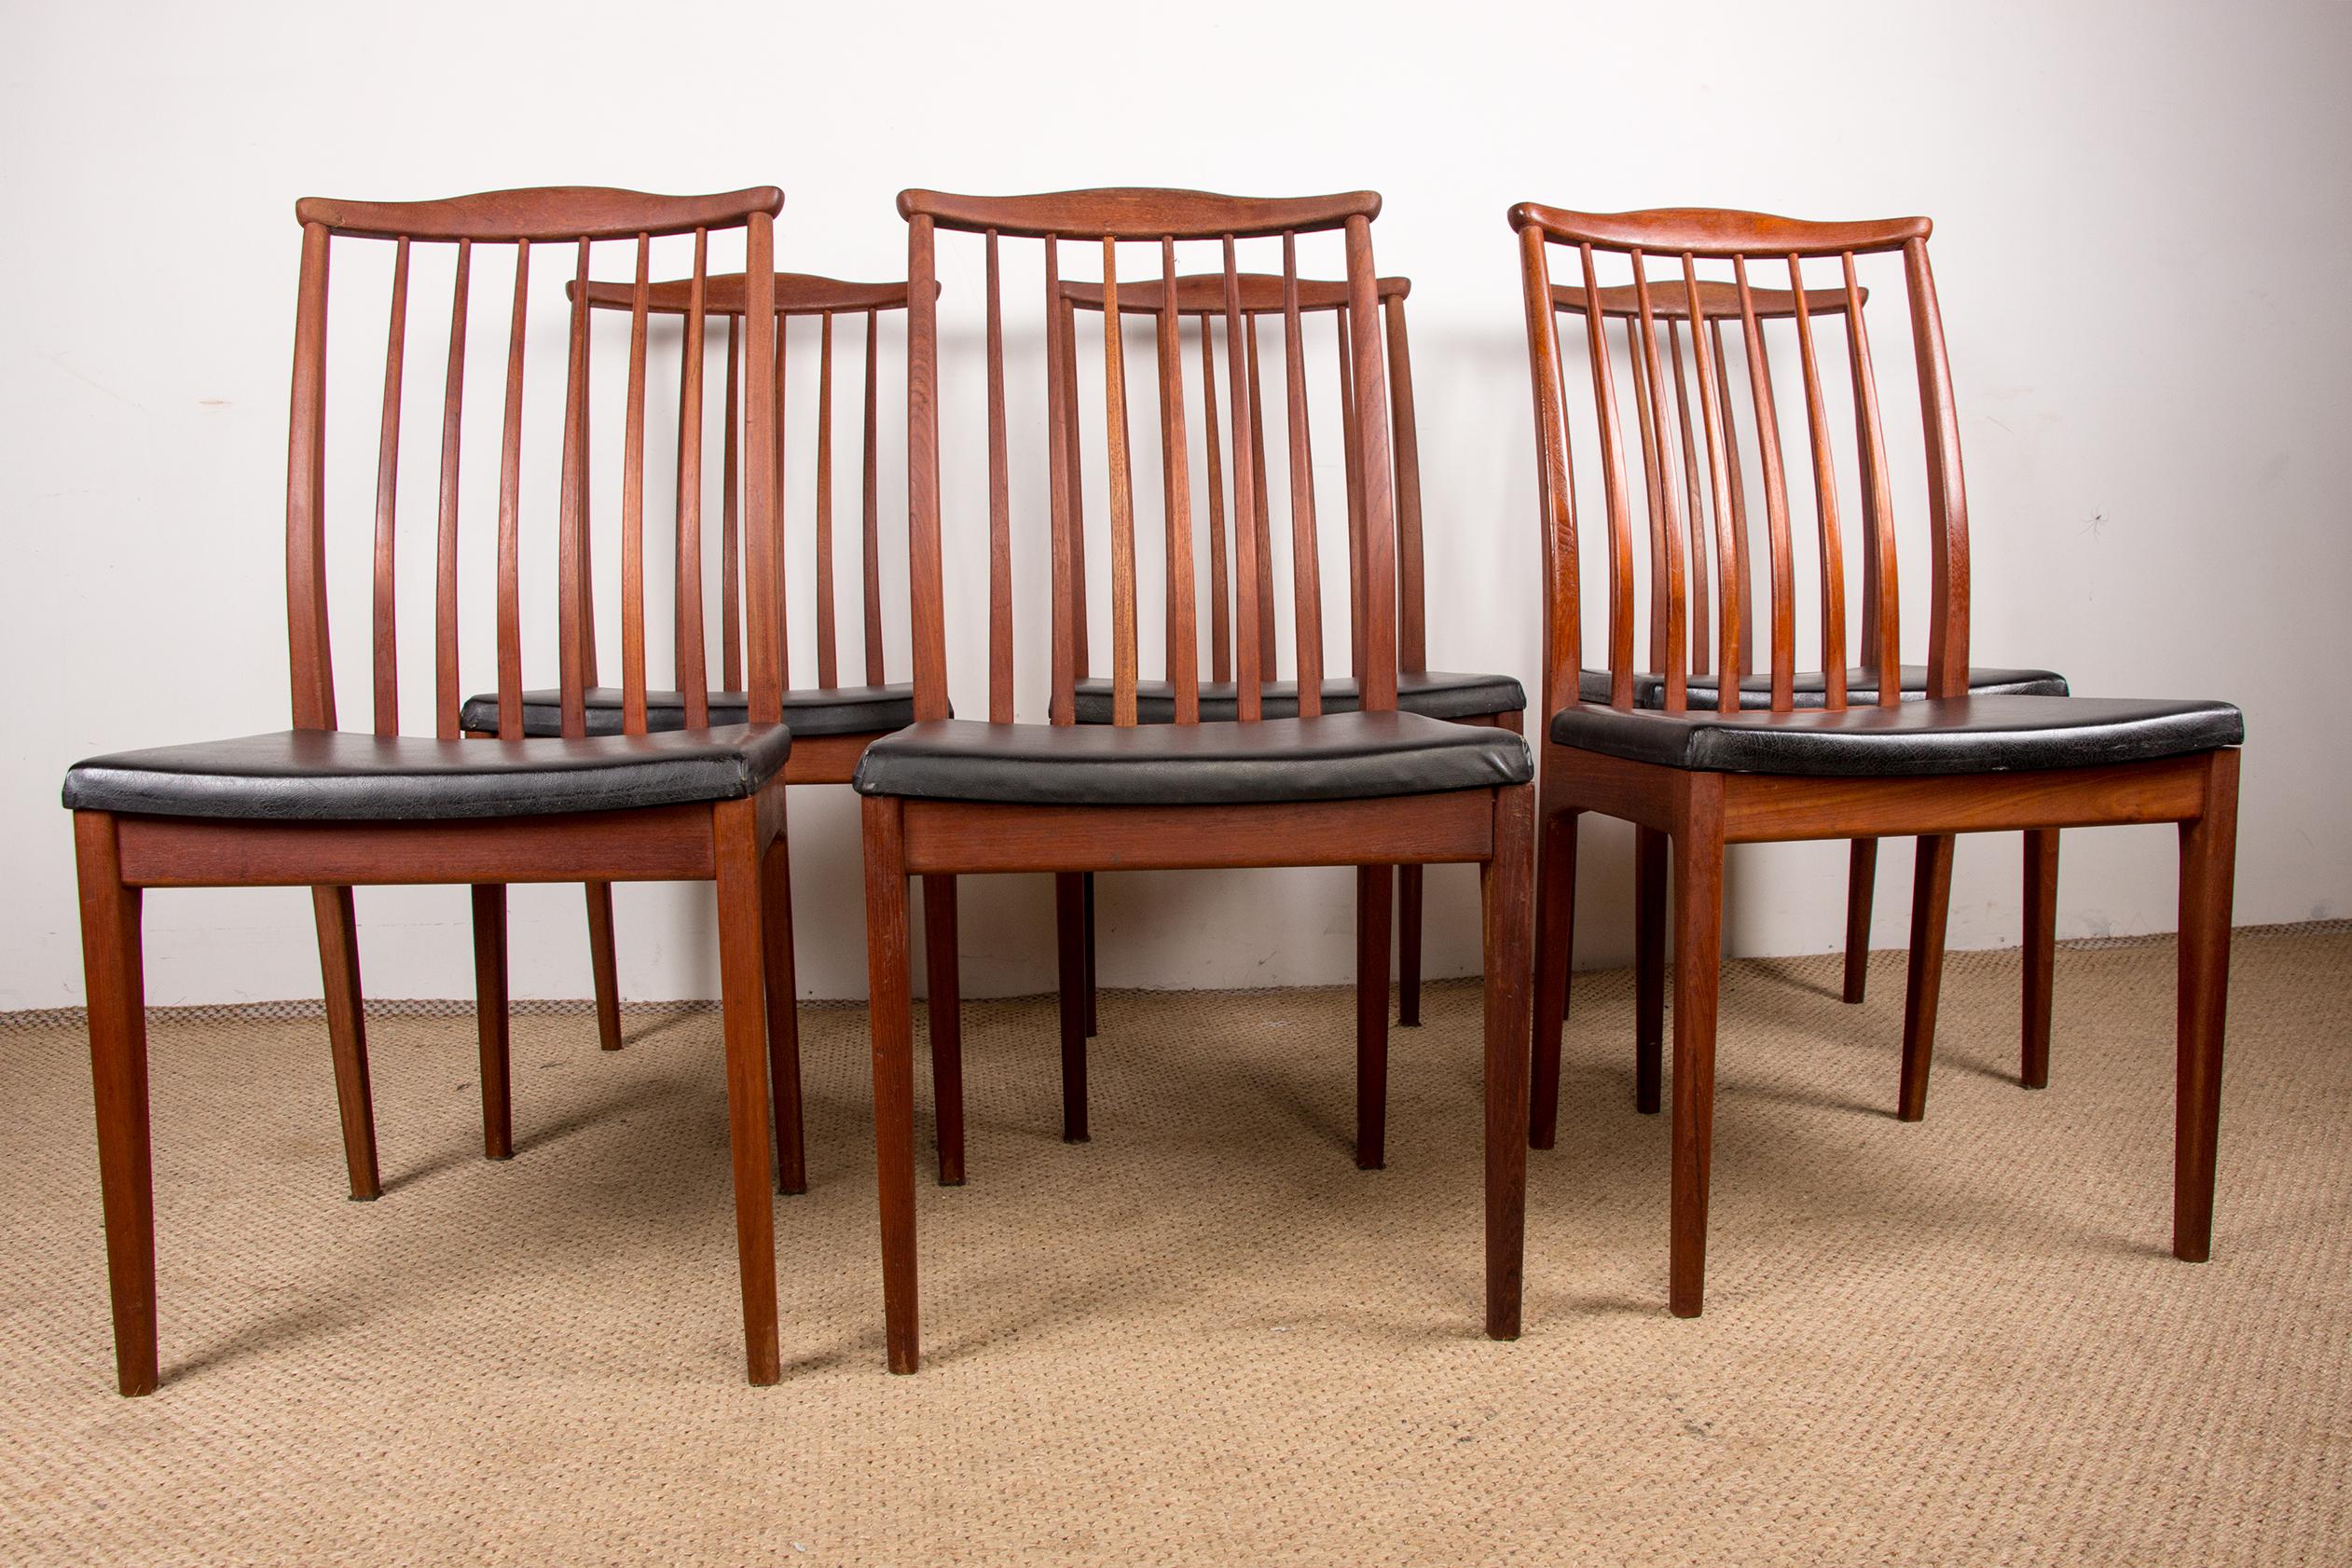 Set of 6 Scandinavian Teak Chairs and Black Leatherette Seats 1960 For Sale 5